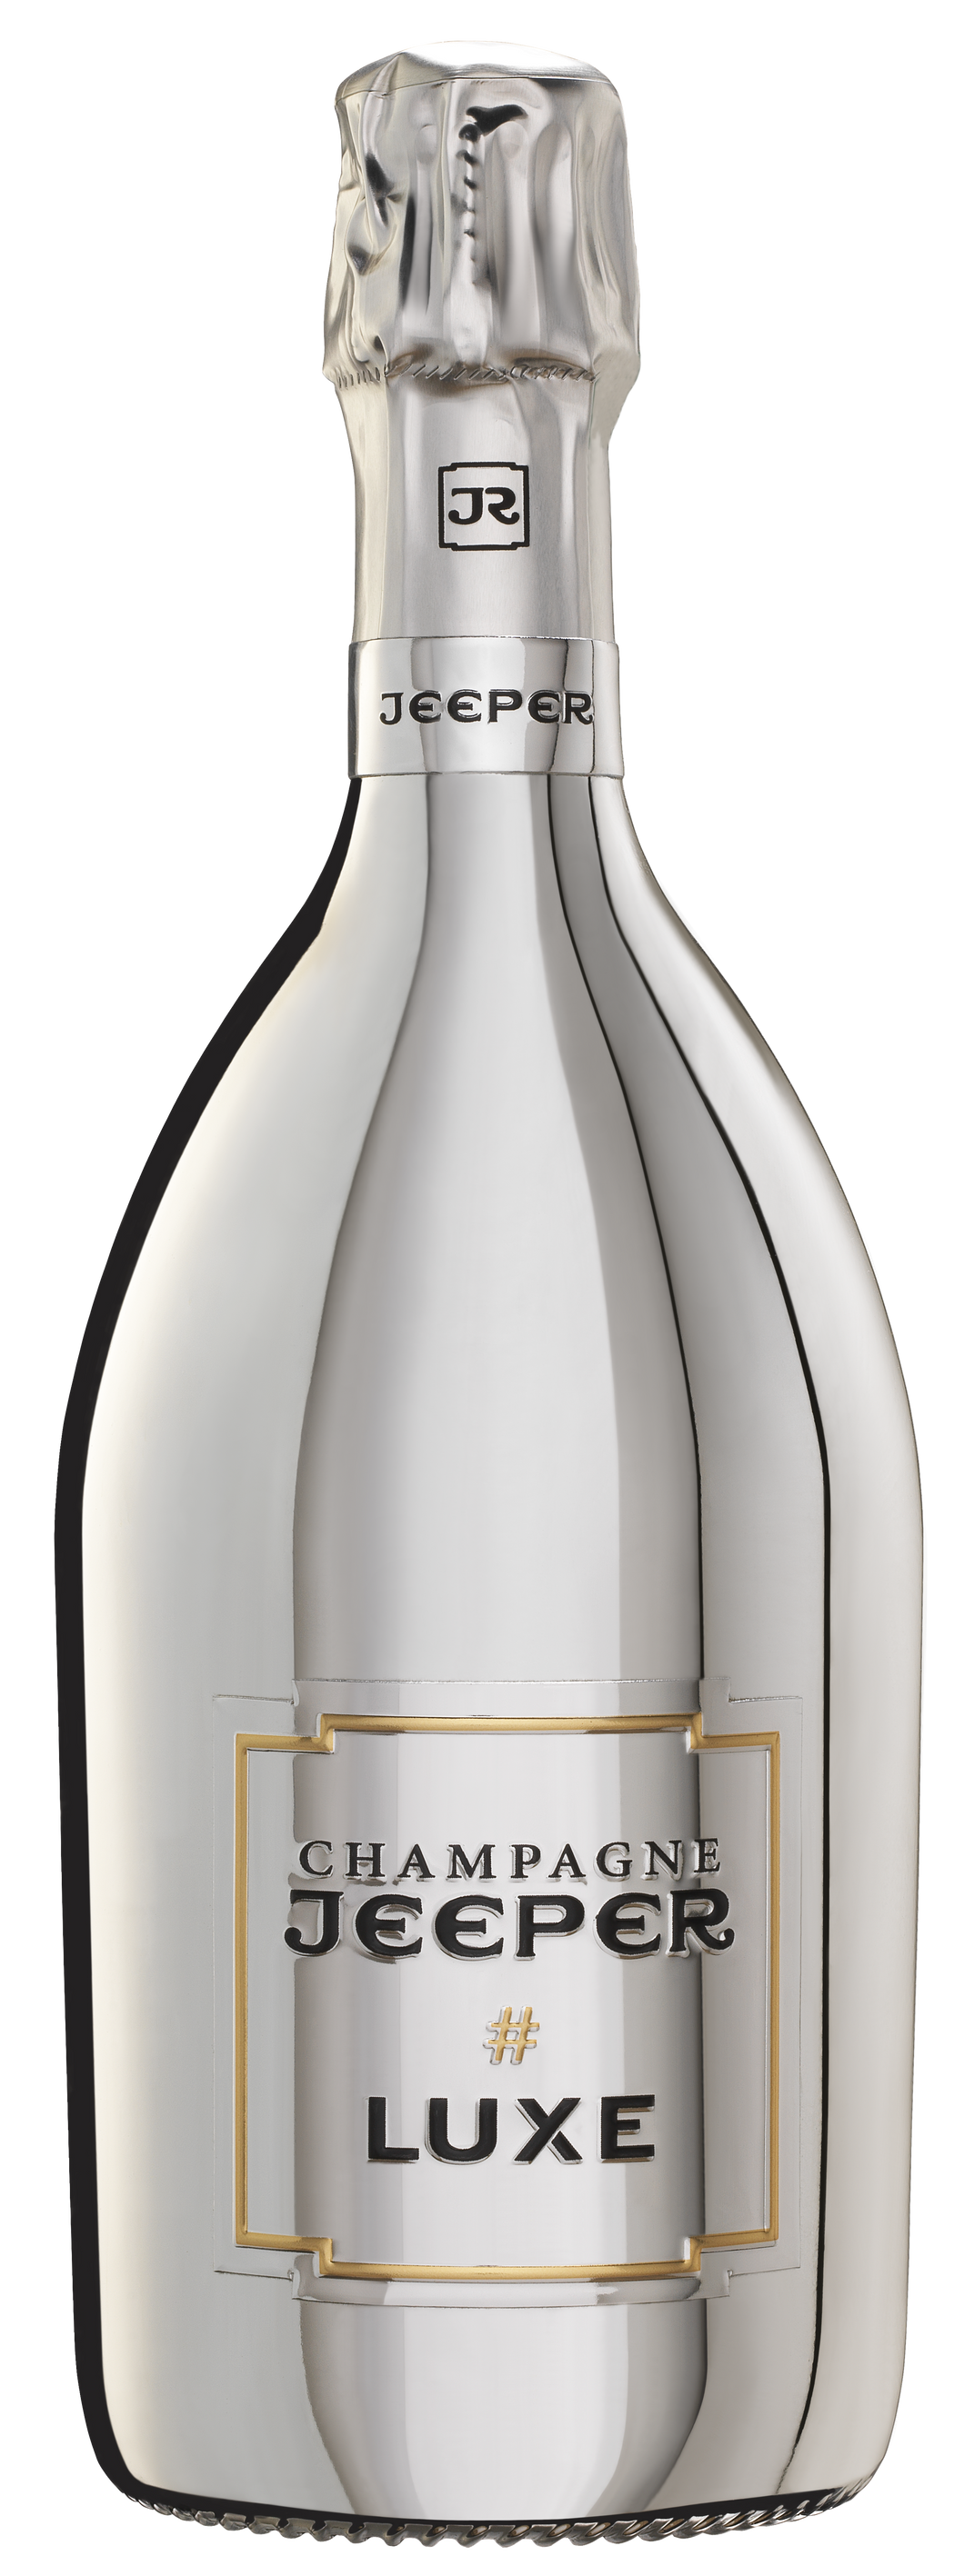 Champagne Jeeper - CUVÉE #Luxe Argent